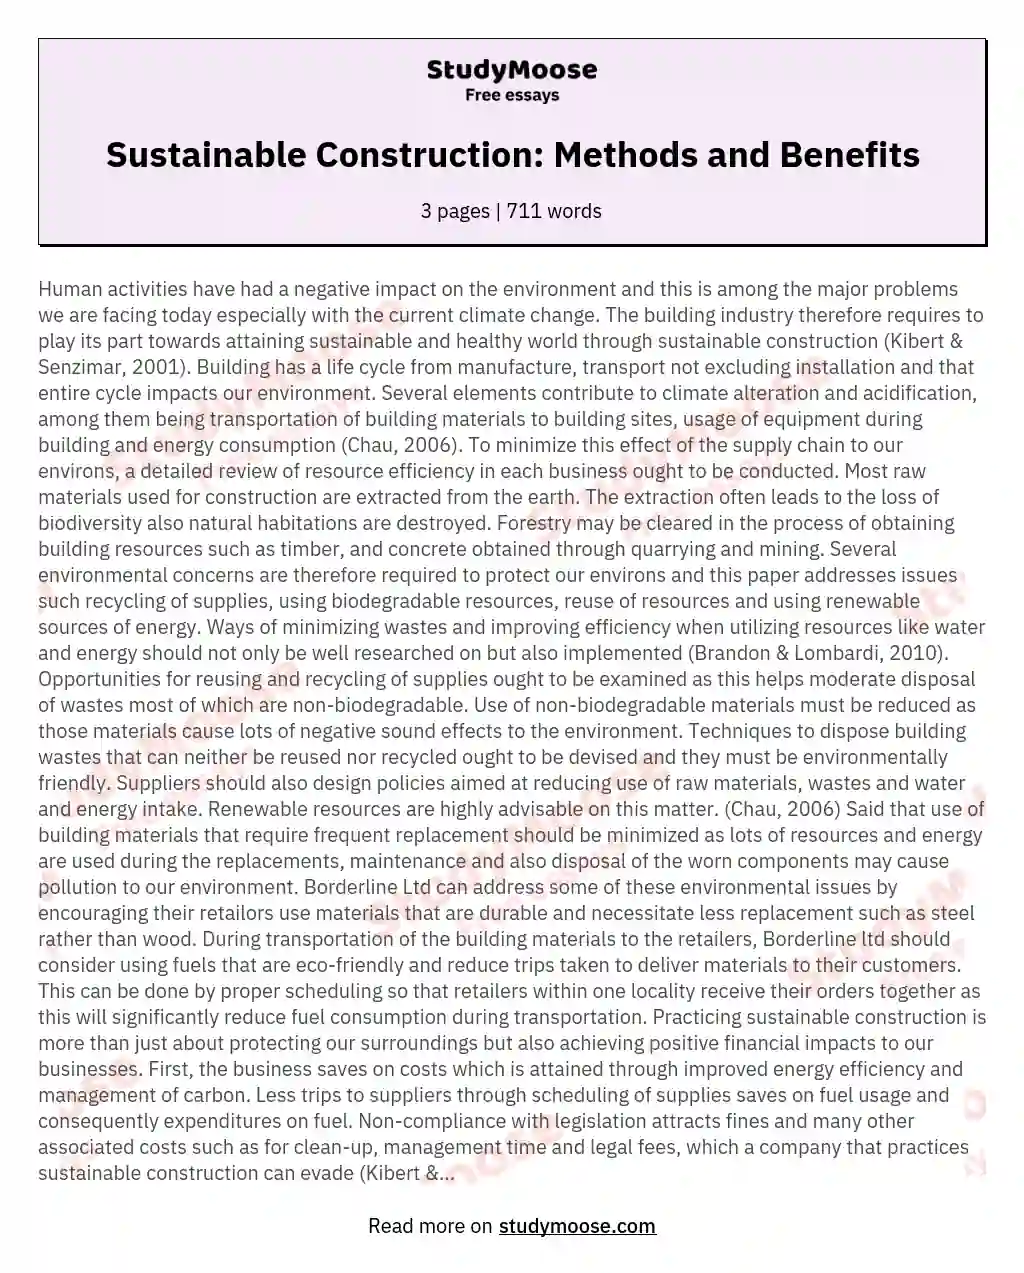 Sustainable Construction: Methods and Benefits essay